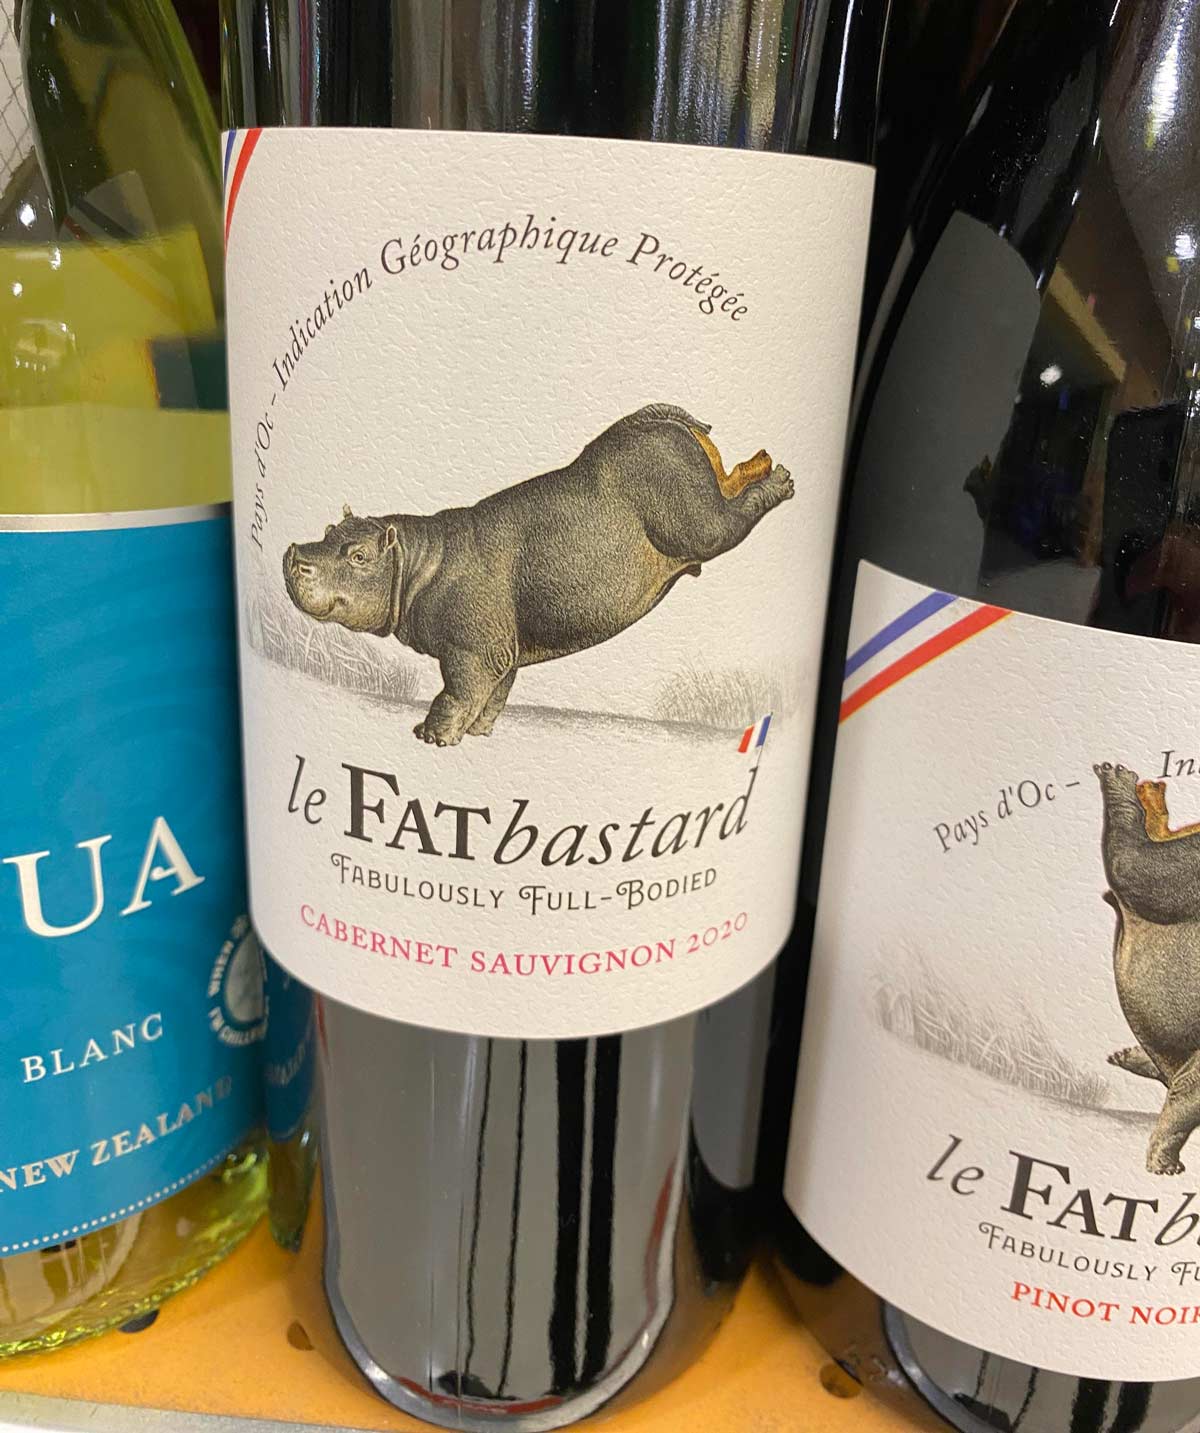 Sometimes I go into the wine section just to find funny wine brands